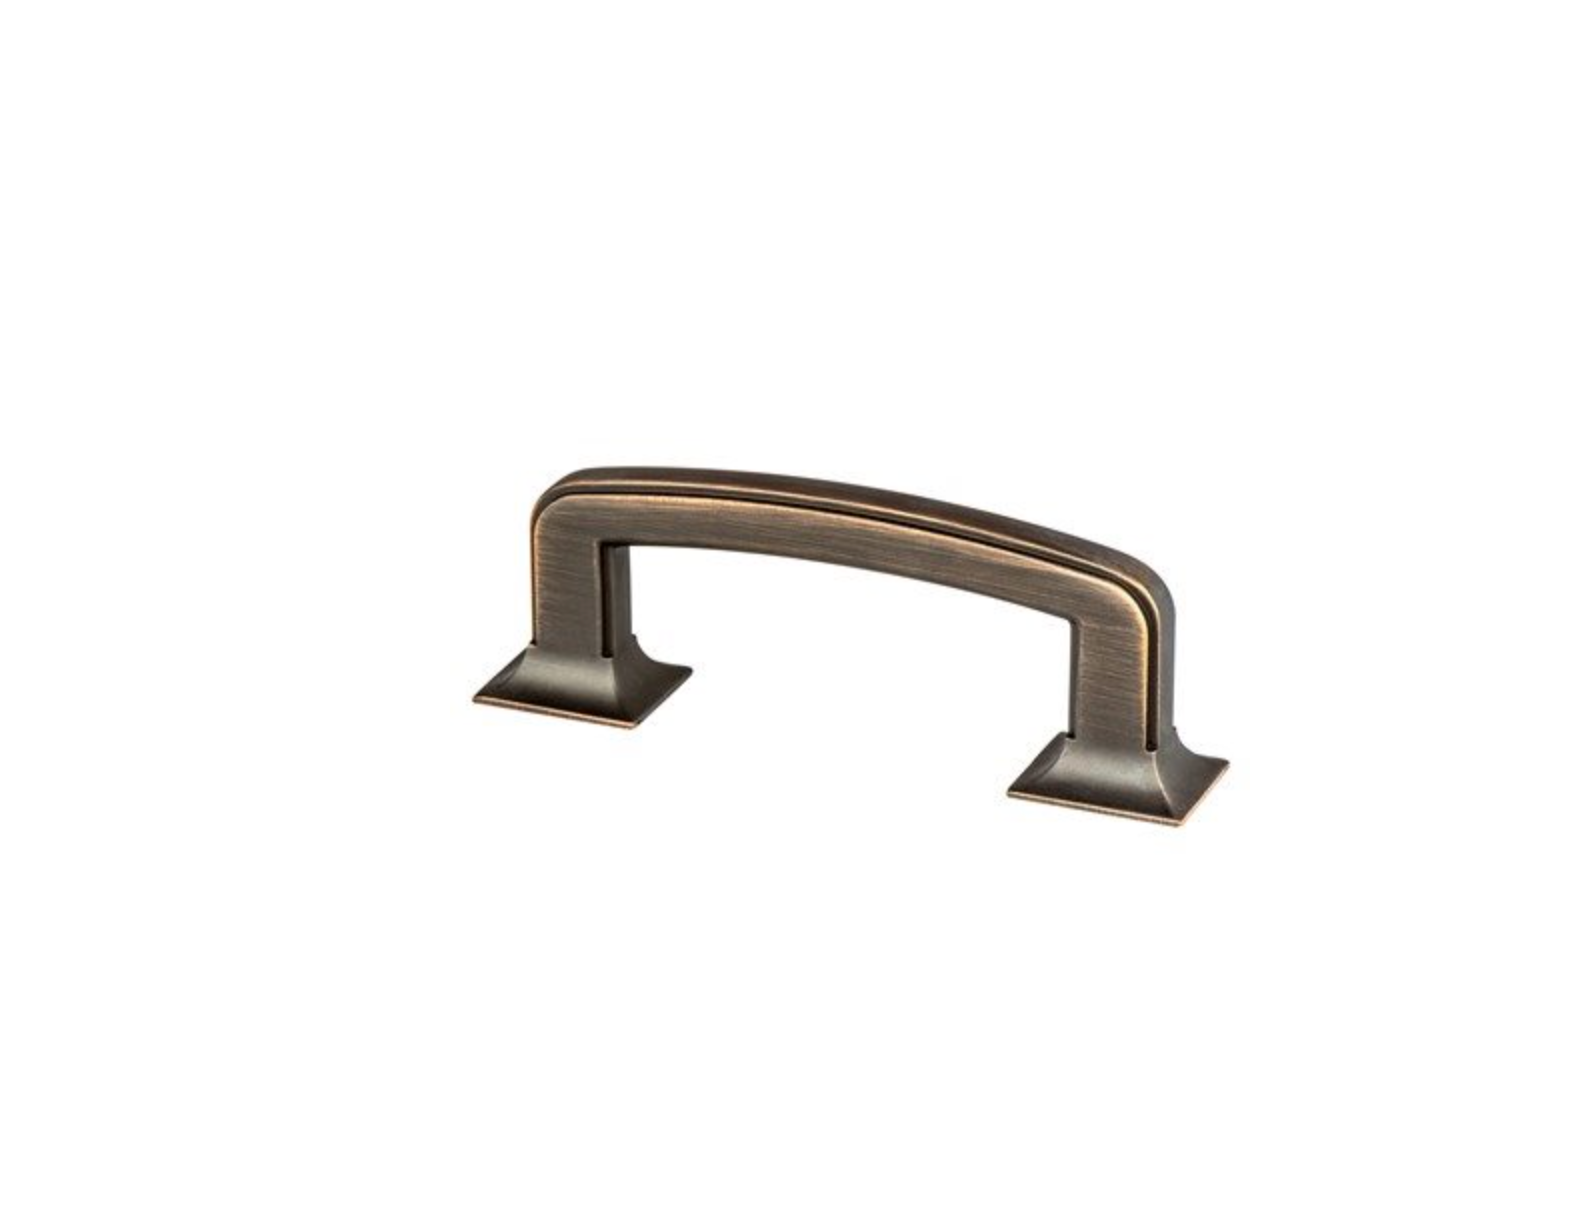 Dark Brushed Bronze "Liana" Drawer Pulls and Knobs for Cabinets and Furniture - Industry Hardware